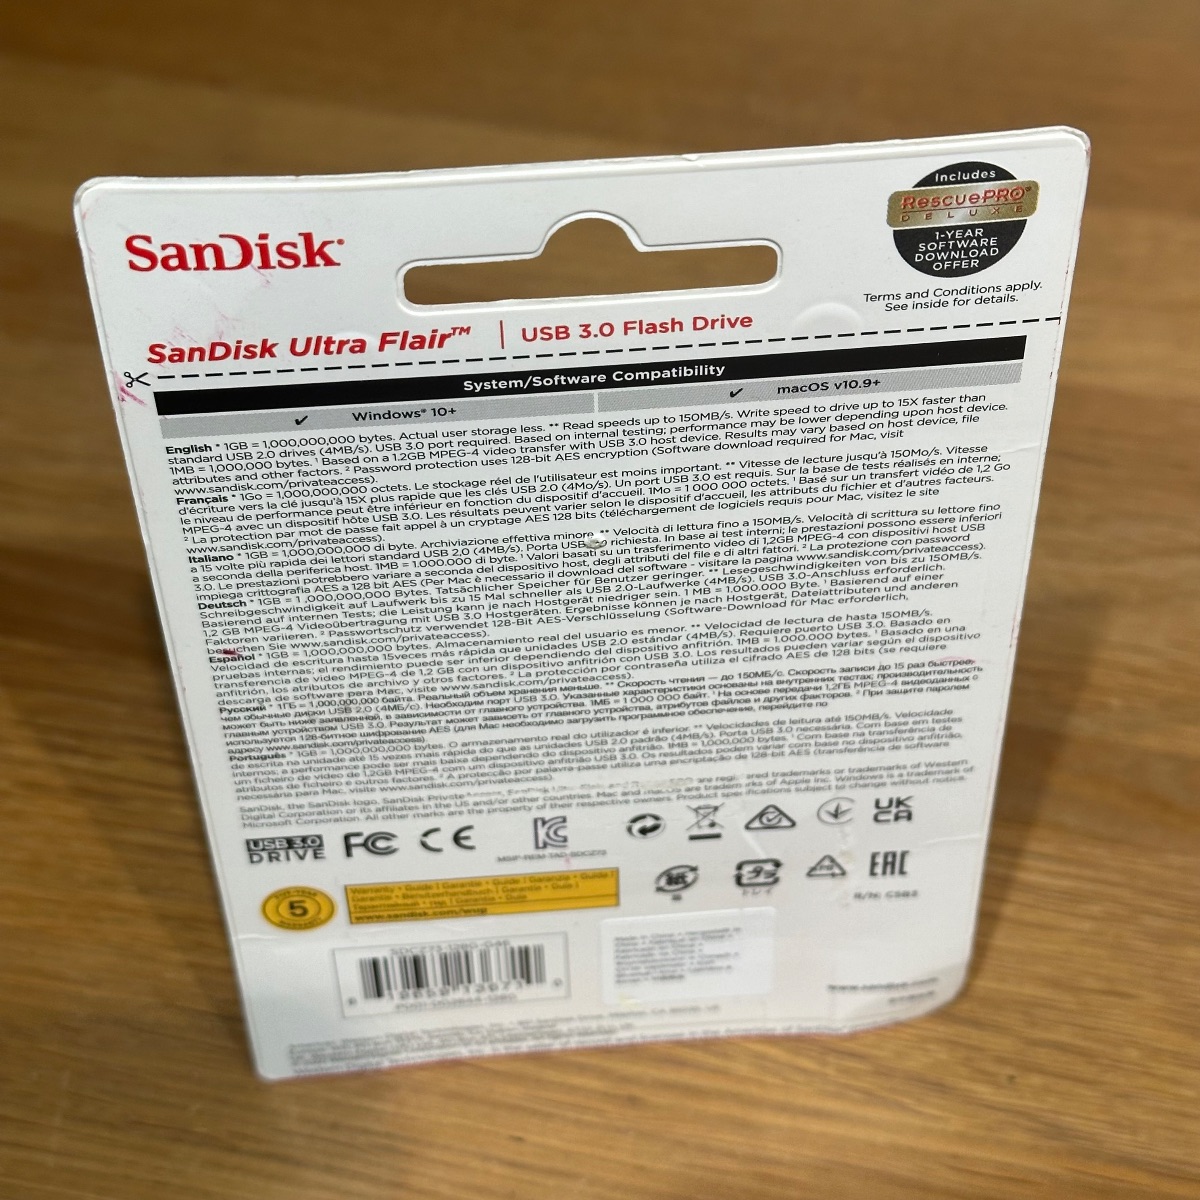 SanDisk Ultra Flair 128GB USB 3.0 Flash Drive Speed 150MB/s Read Sealed SDCZ73-128G-G46 619659136710 (Brand New)